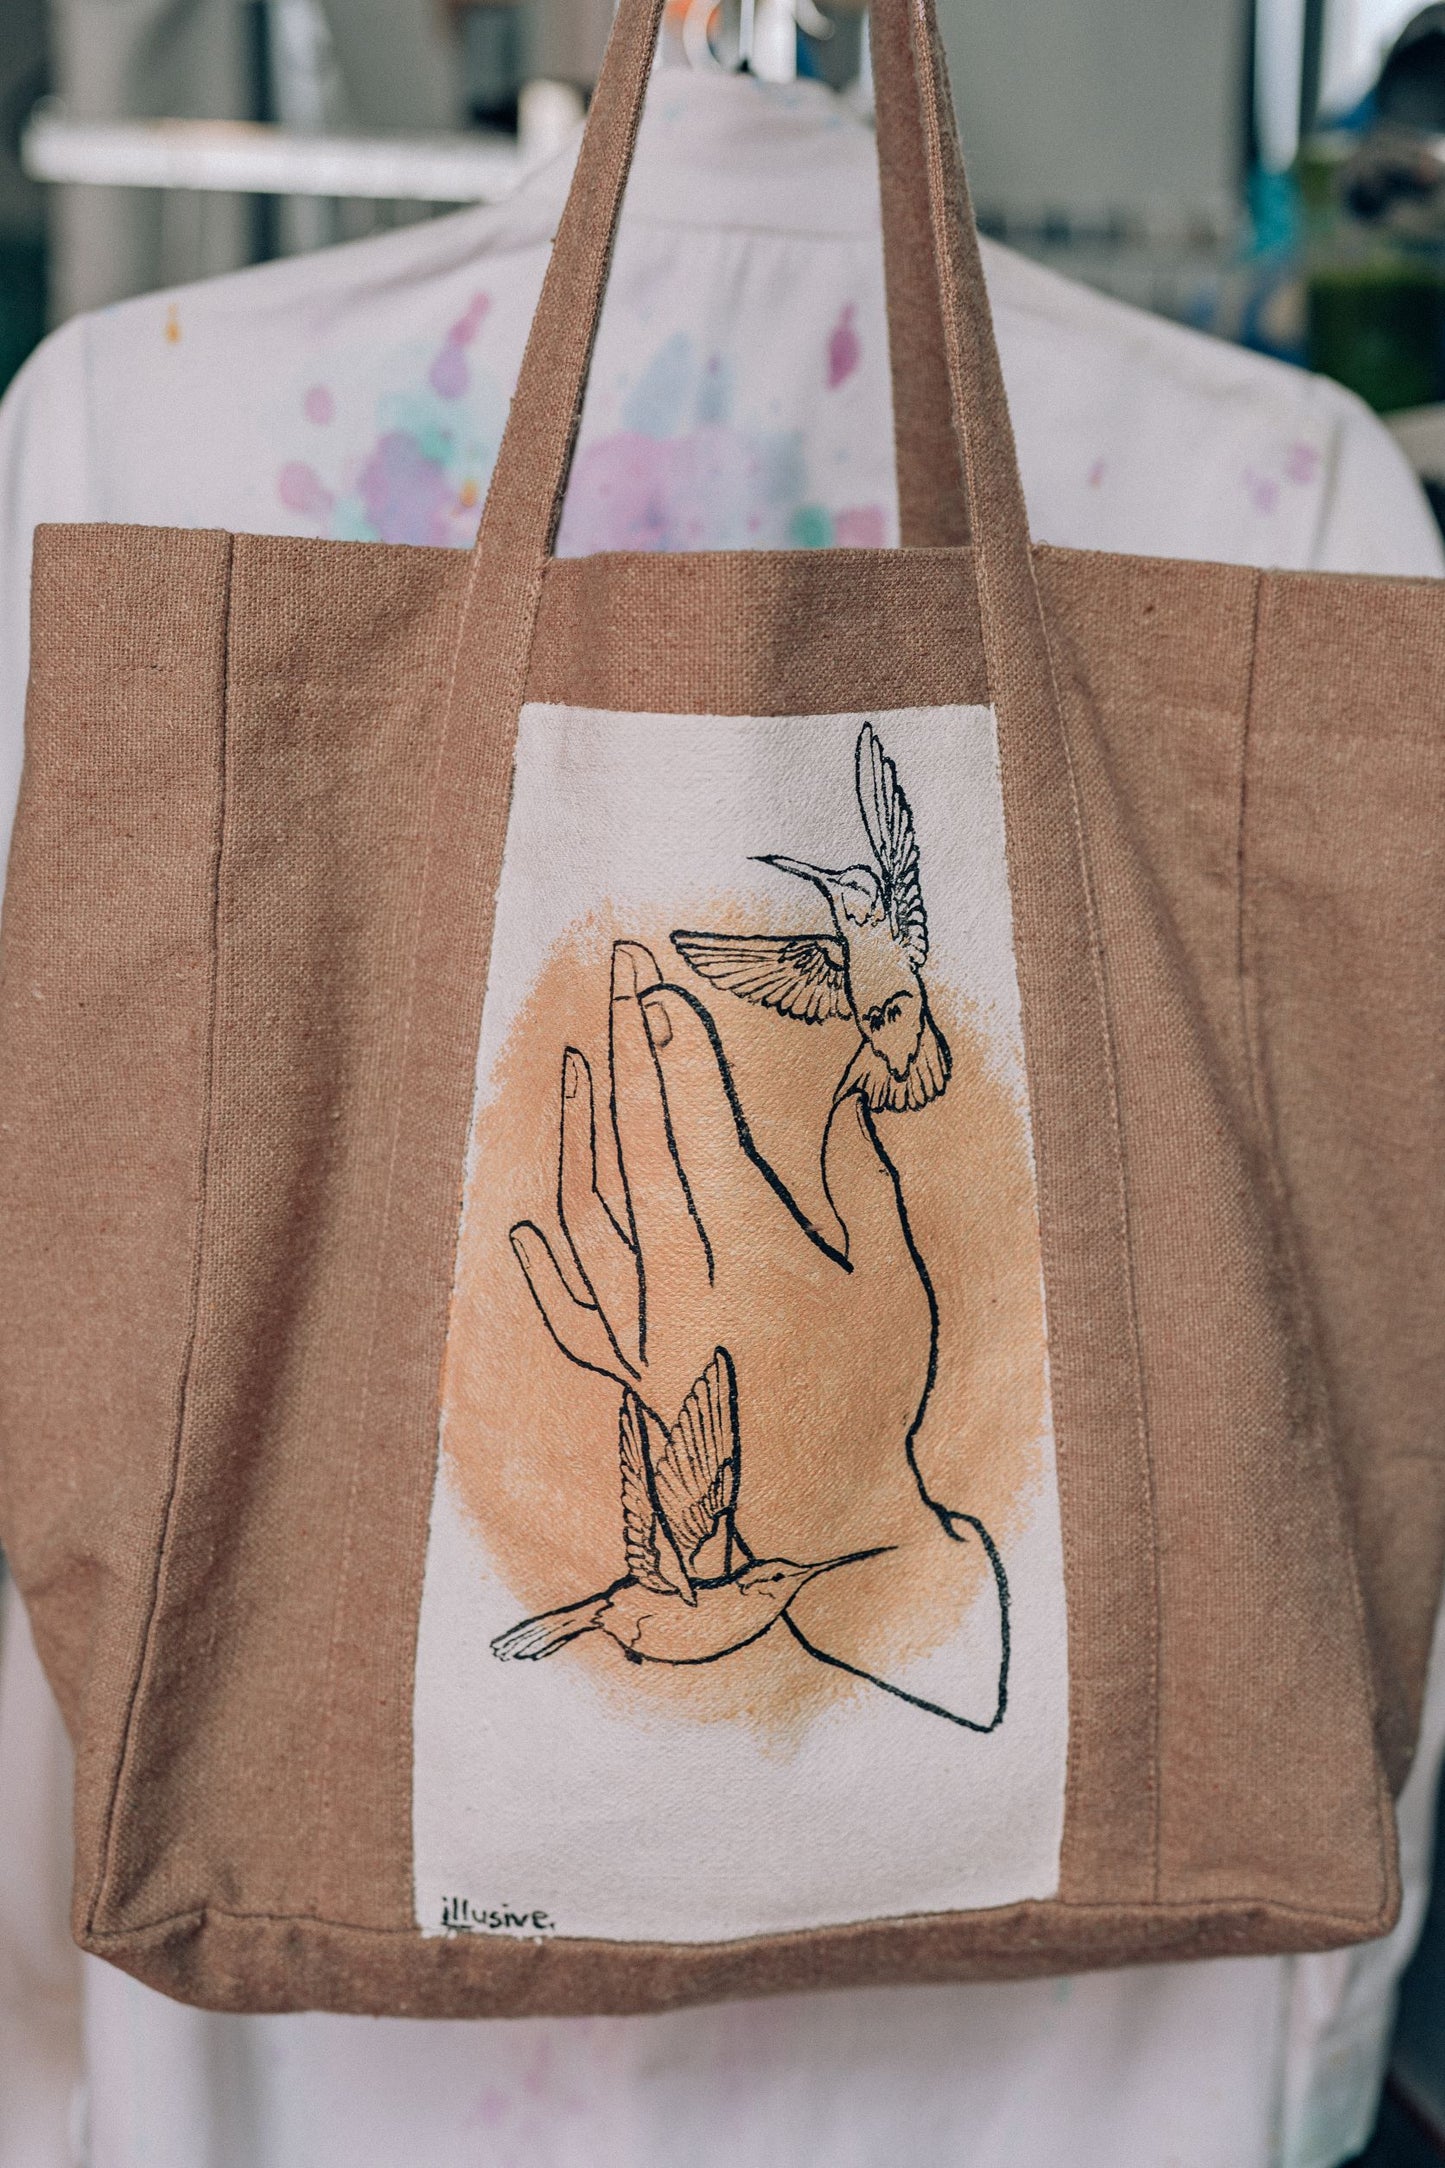 Locally Crafted Hand Painted Tote bag